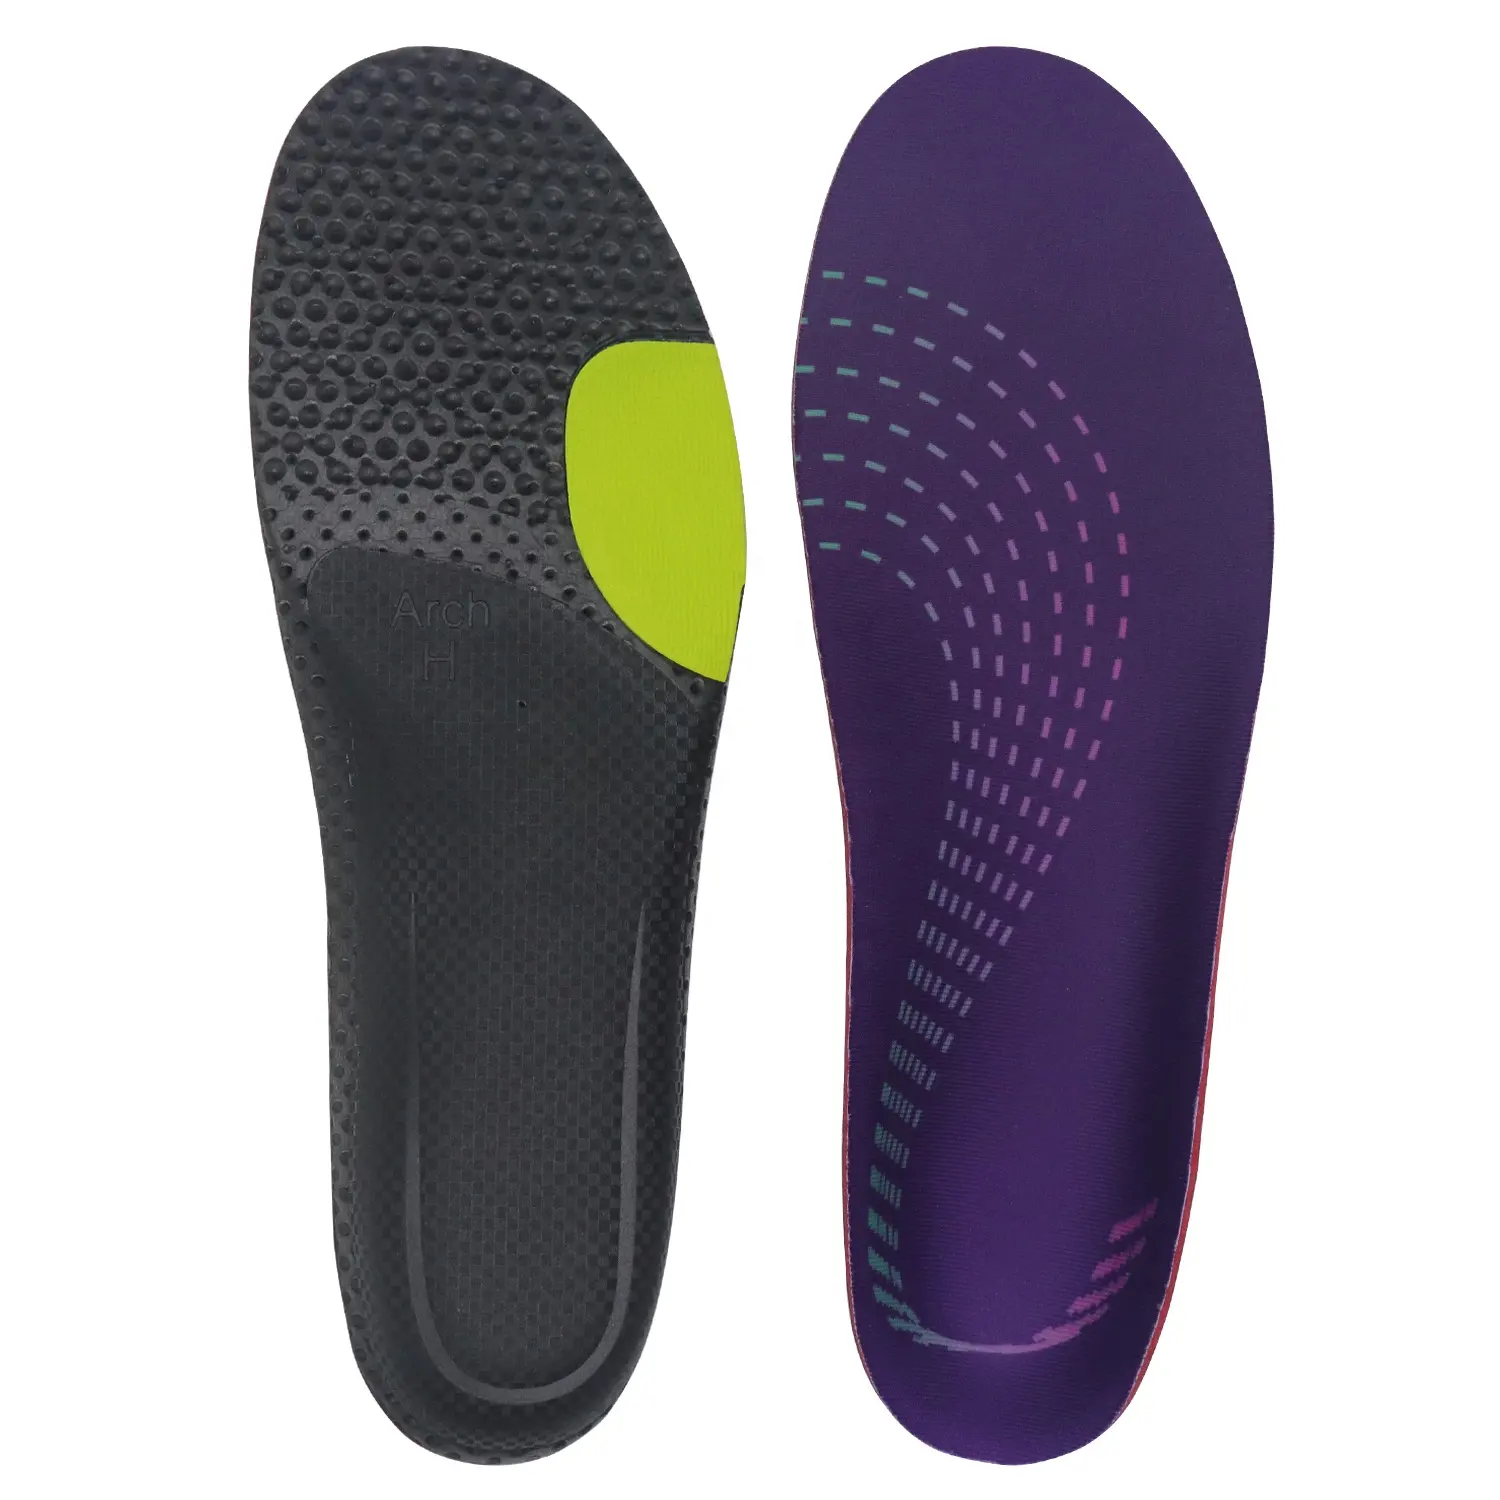 EVA Breathable Running Honeycomb Insoles Memory Foam Insole Unisex Sports Shoes Insoles